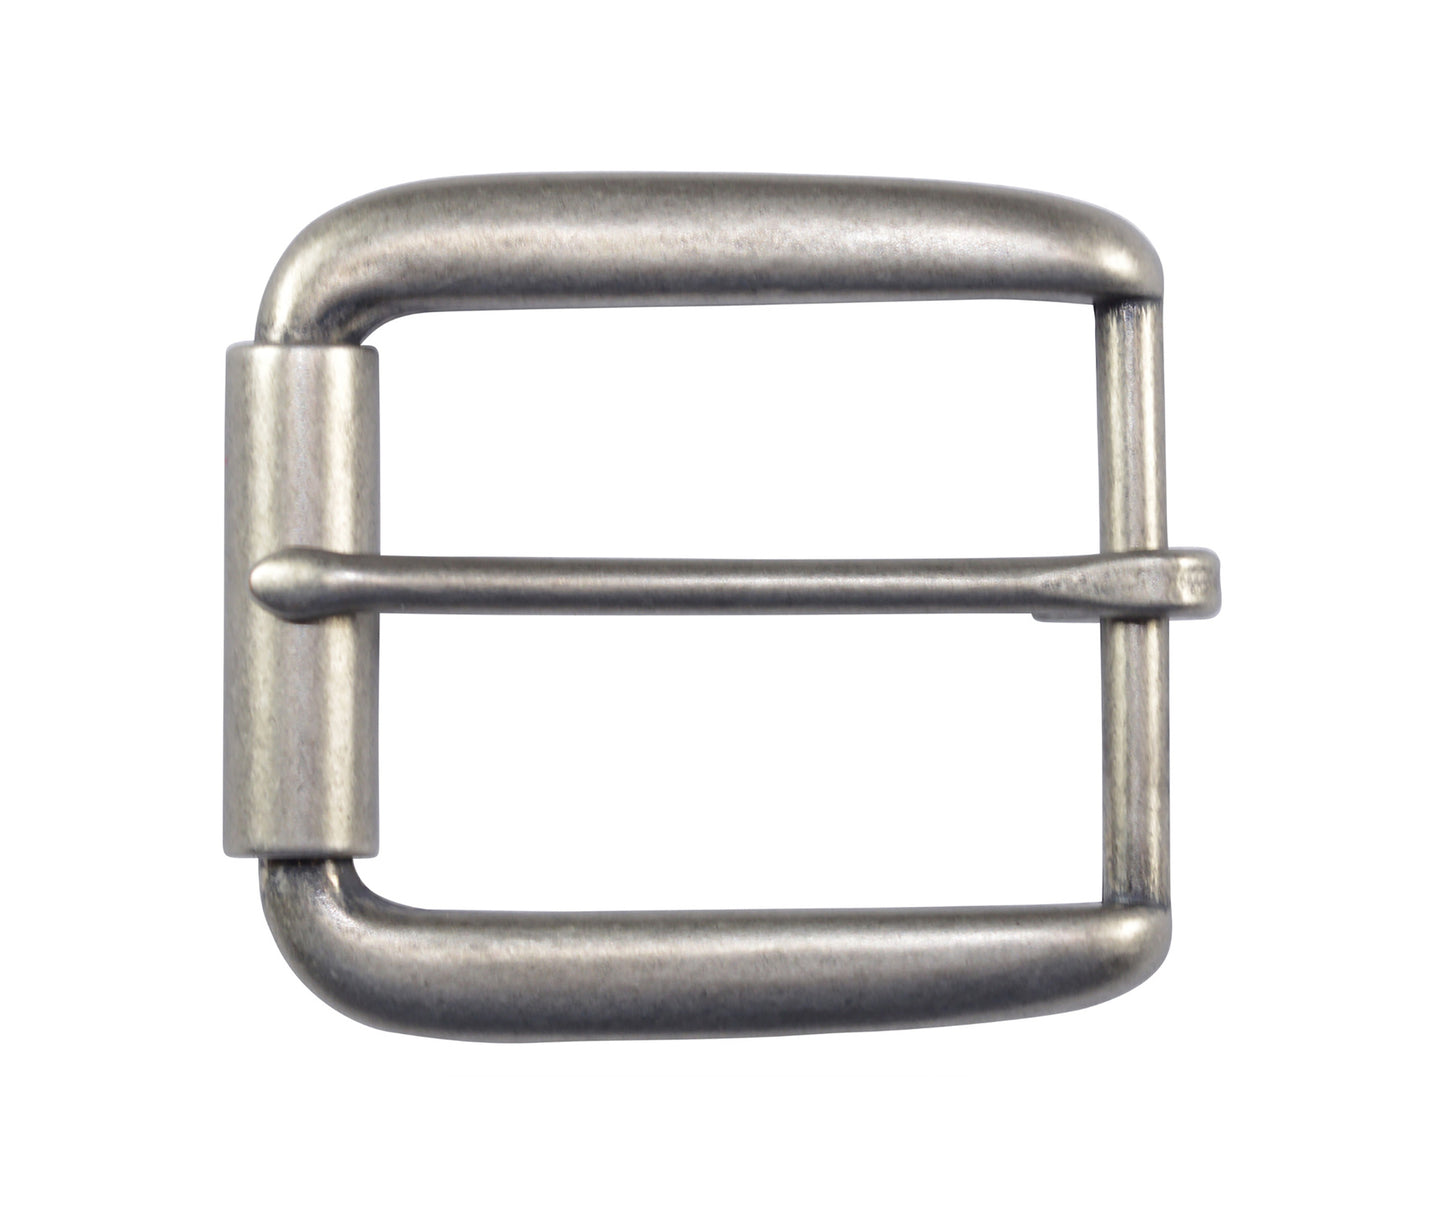 TBS-P4767S - Antique Silver Elongated Roller Buckle for 1 1/2" Belts